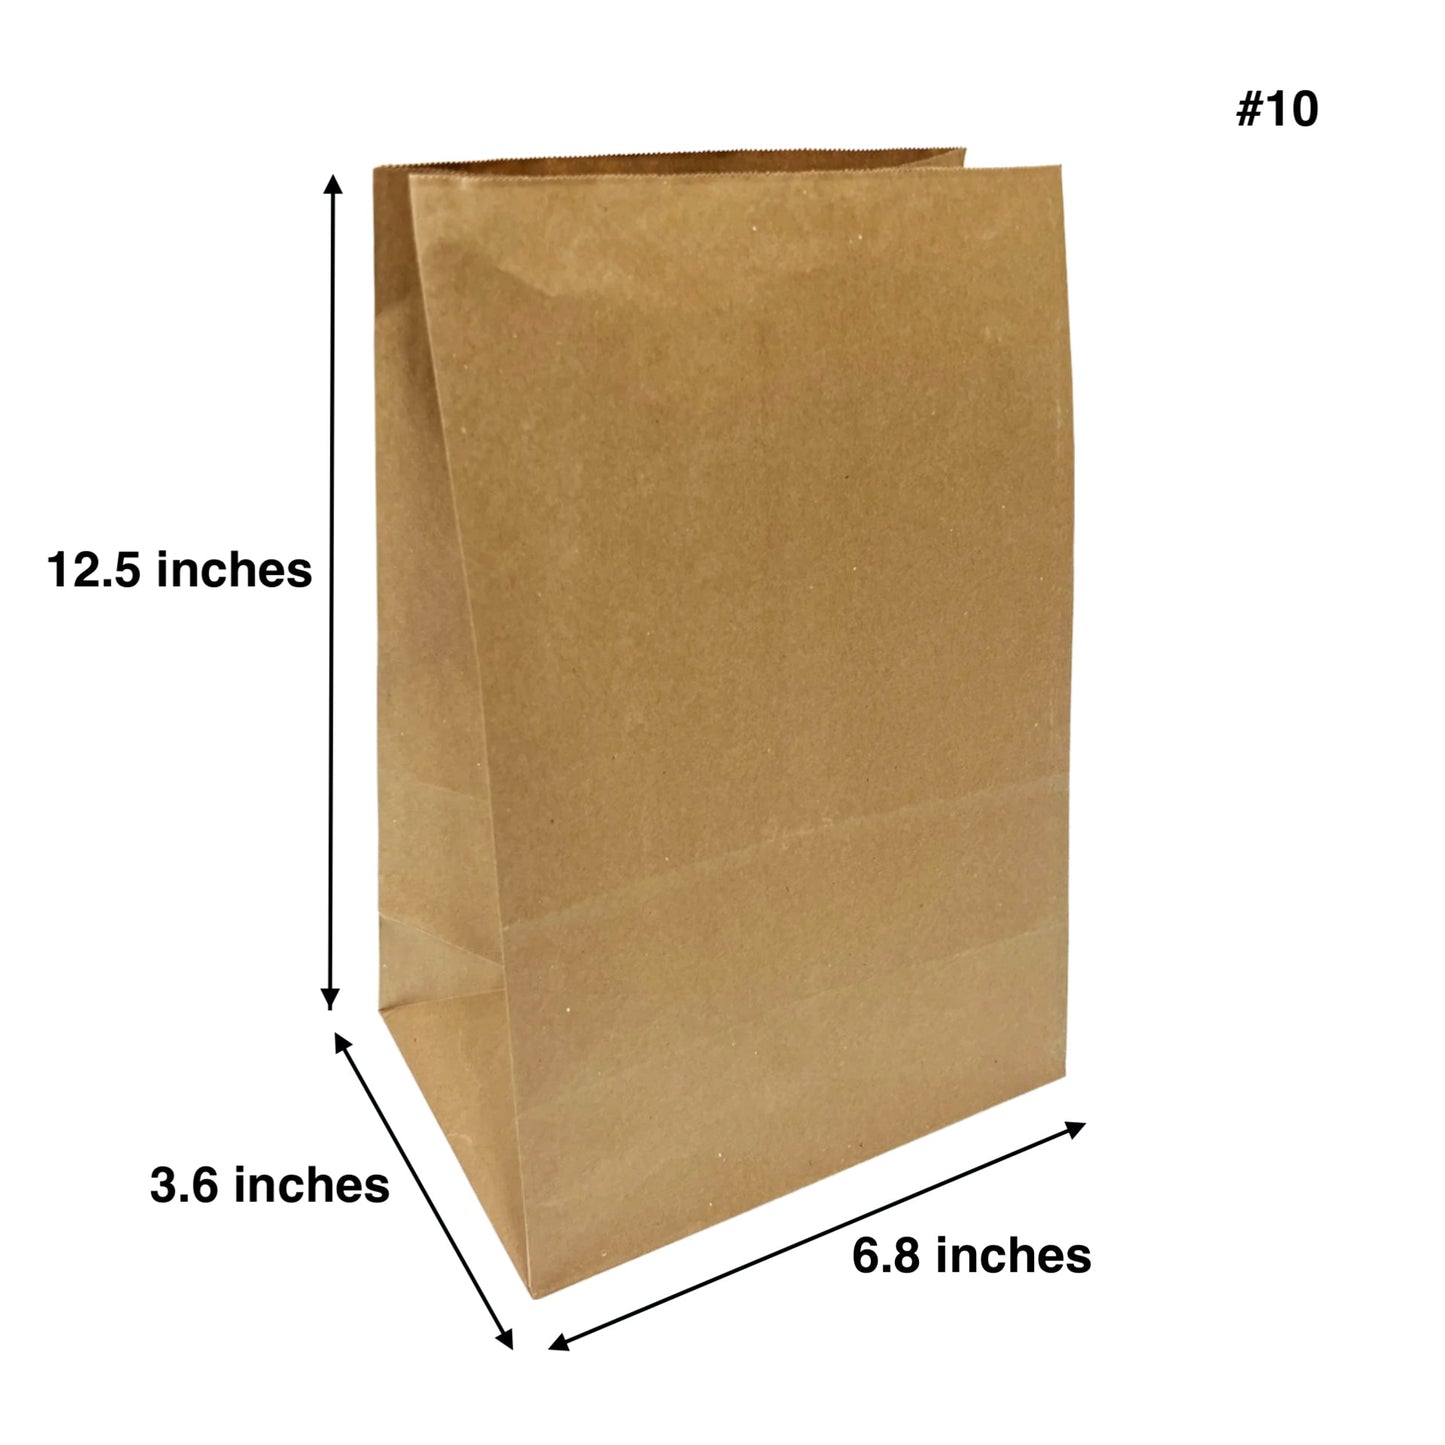 500pcs #10 Grocery Bags 6.8x3.6x12.5 inches; $0.067/pc